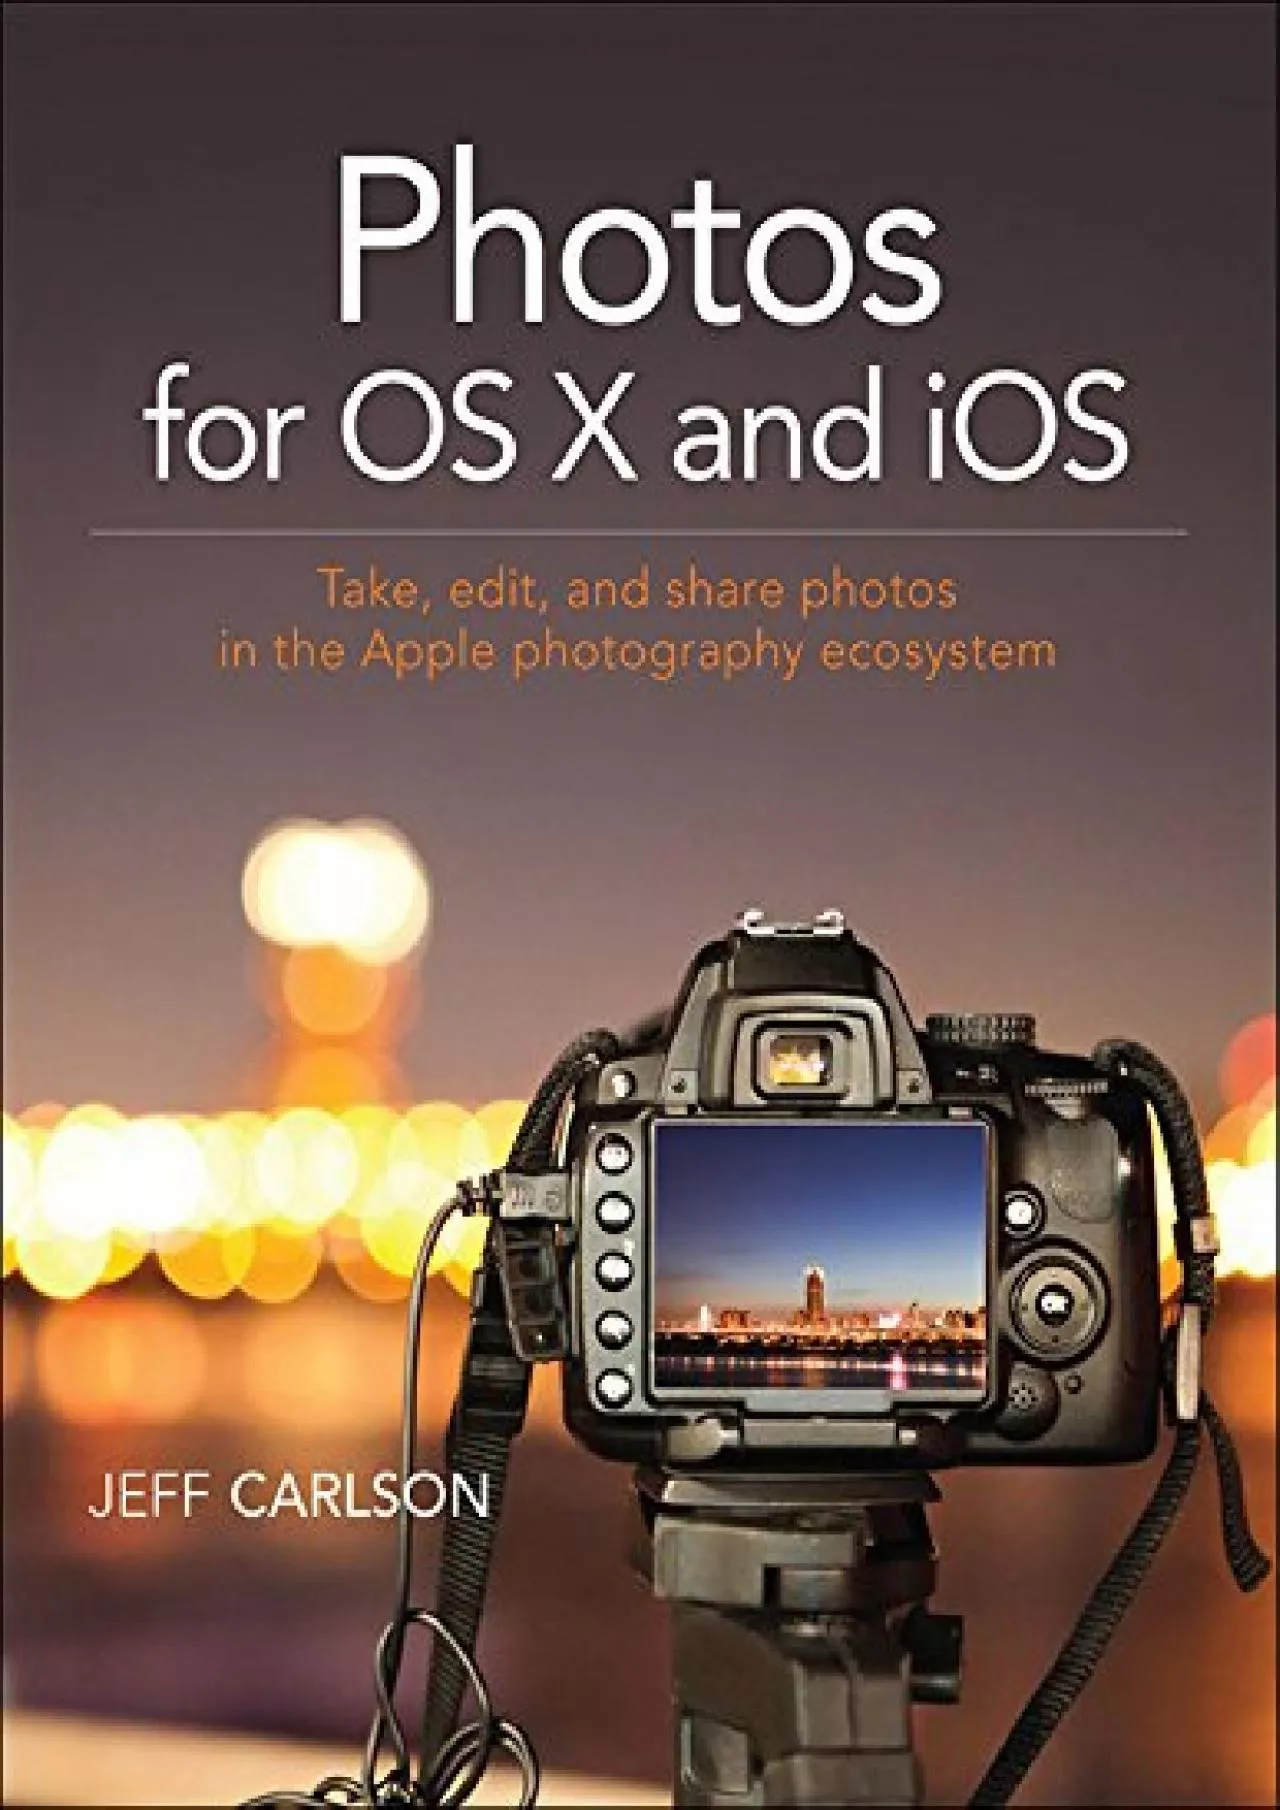 (BOOS)-Photos for OS X and iOS: Take, edit, and share photos in the Apple photography